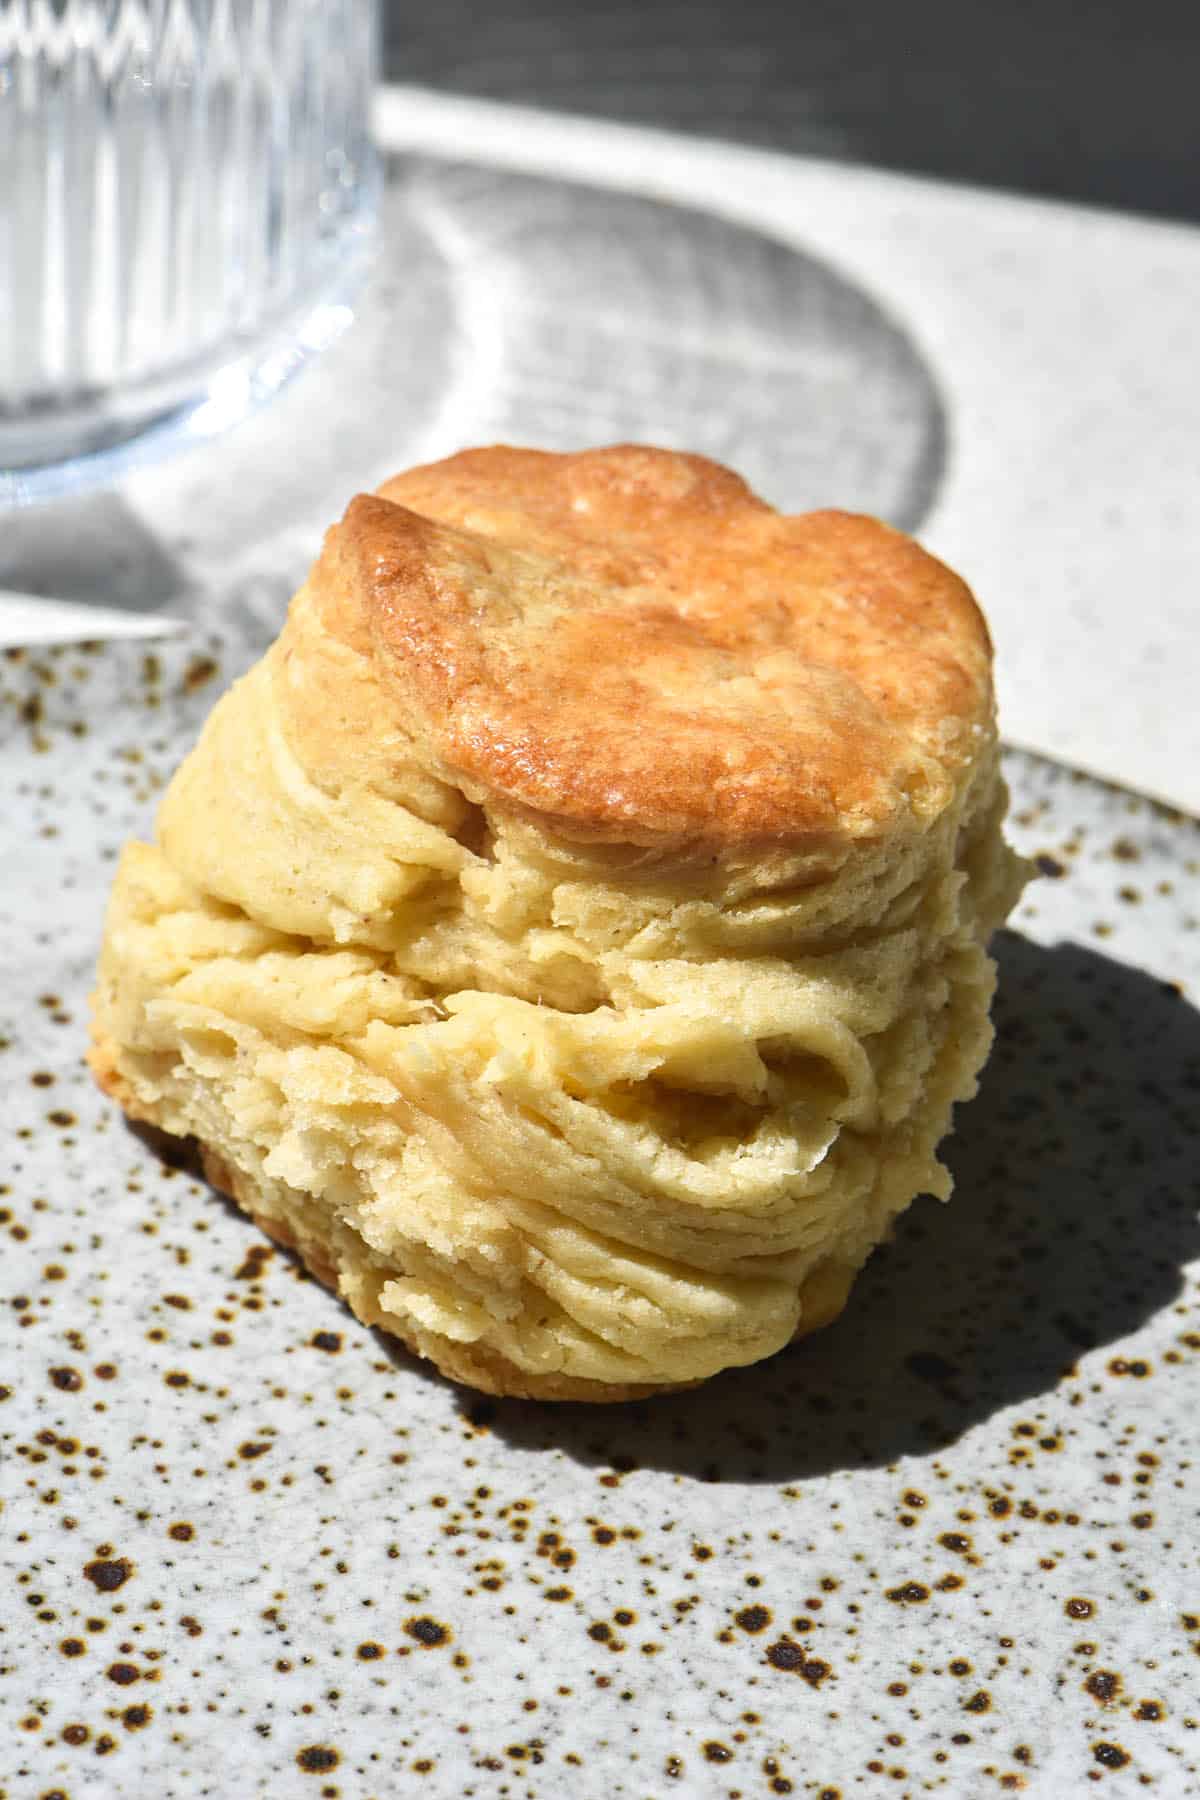 A brightly lit image of a flaky and tall gluten free scone on a white speckled plate. A glass of water sits in the back of the image and casts a shadow